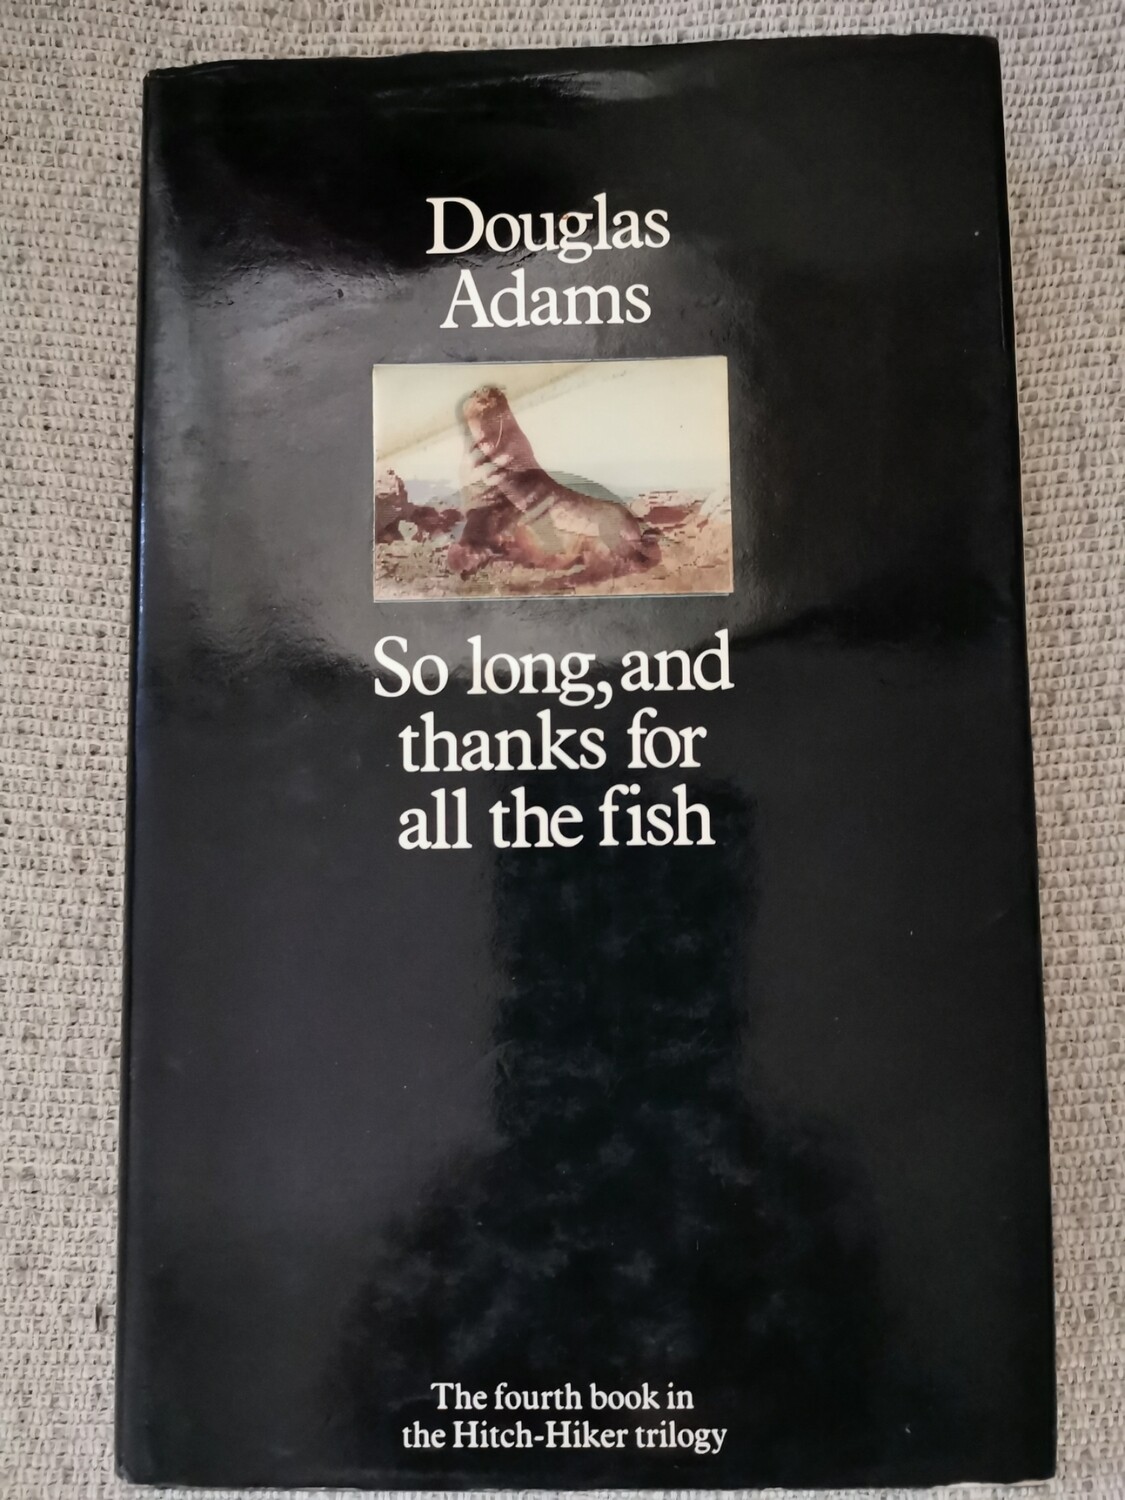 So long and thanks for all the fish, Douglas Adams